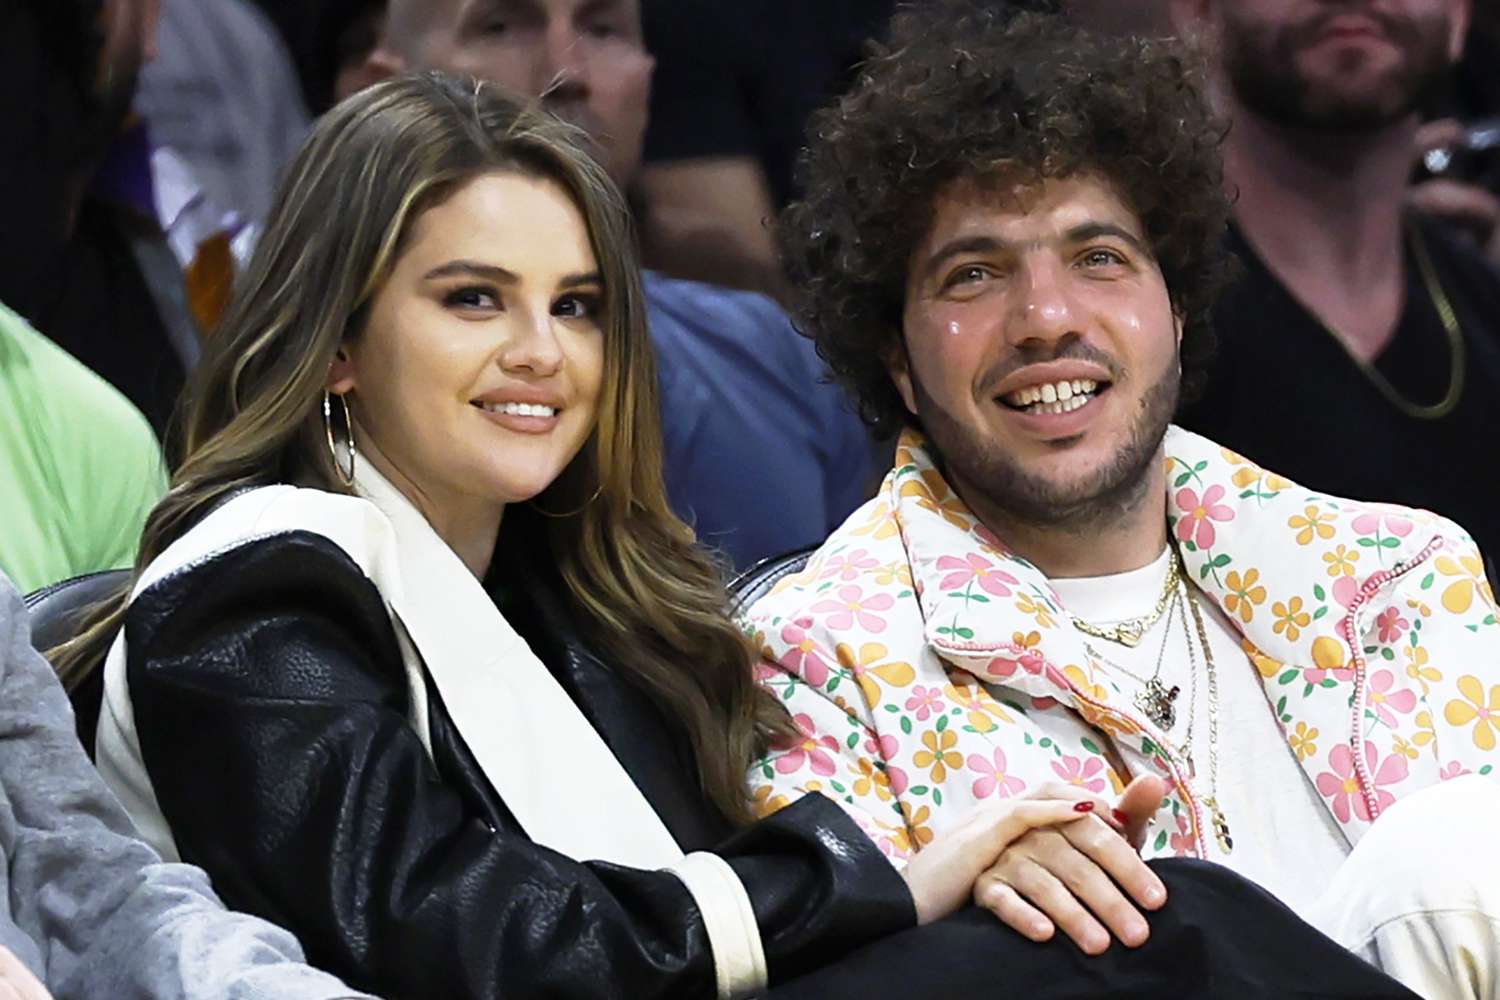 Benny Blanco ‘Brought a Deep Fryer’ and ‘Nacho Machine’ to Movie Theater Date with Selena Gomez to Make Her Fave Foods